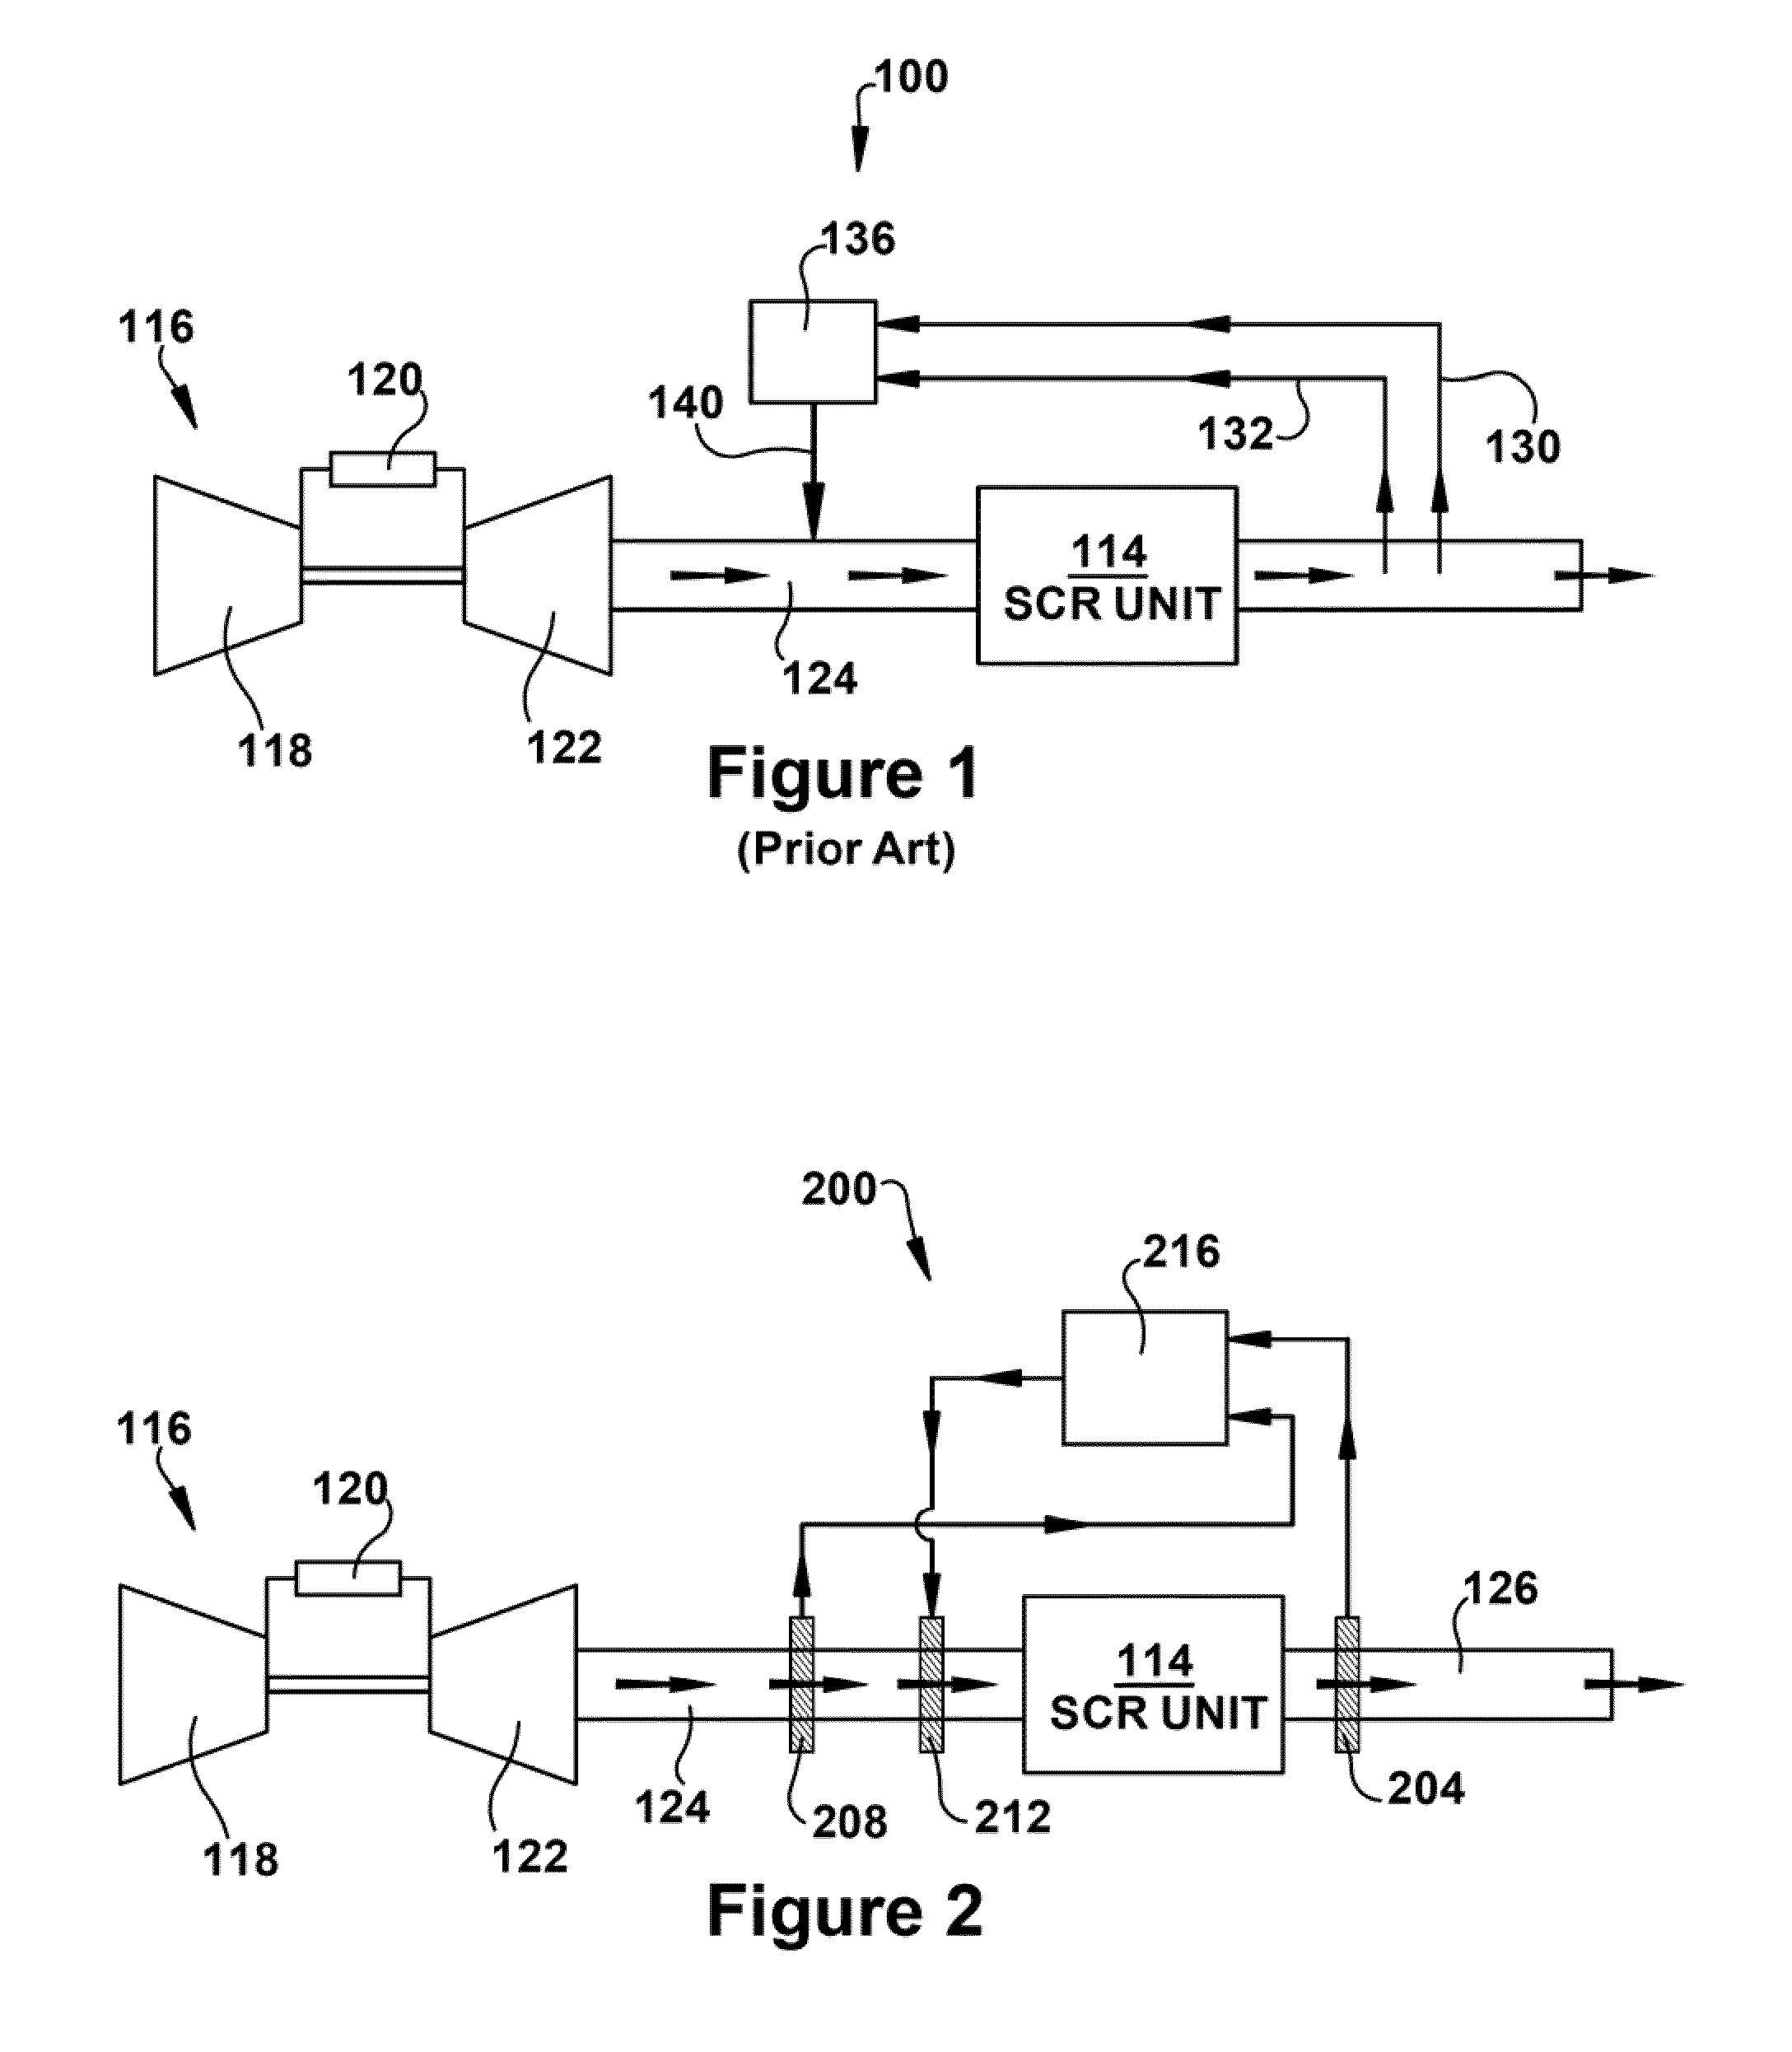 Systems and apparatus relating to the monitoring and/or controlling of selective catalytic reduction processes